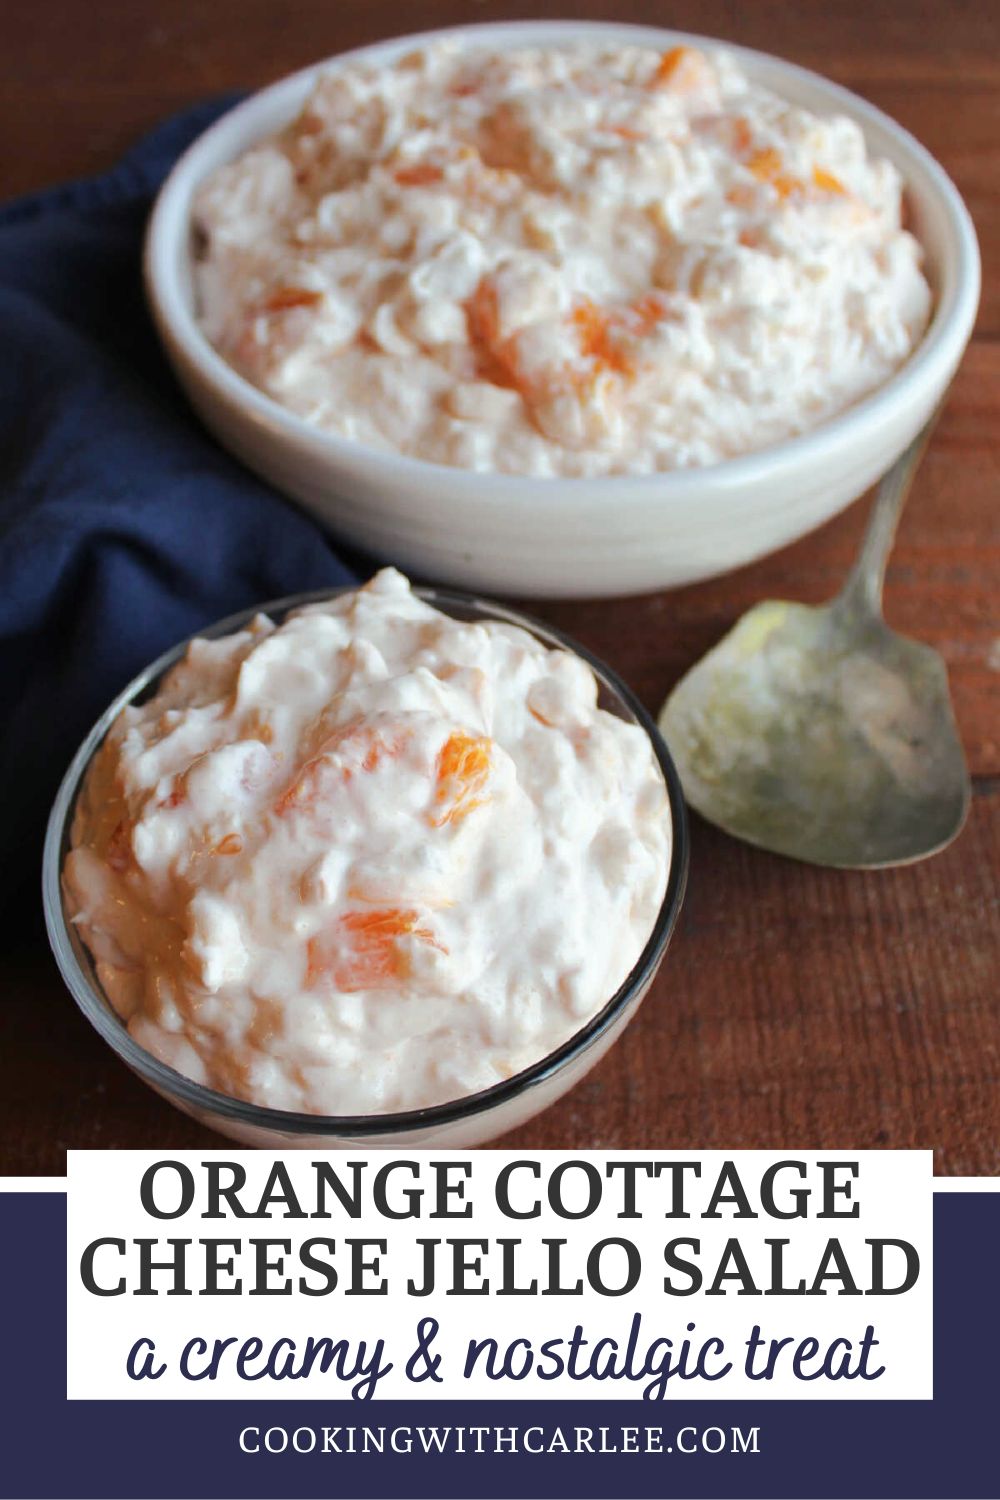 Orange cottage cheese Jello salad is full of mandarin oranges and pineapple. It is creamy, nostalgic, and delicious. The final texture is more like a fluff salad than a wiggly jiggly Jello salad and it is a perfect refreshing treat.